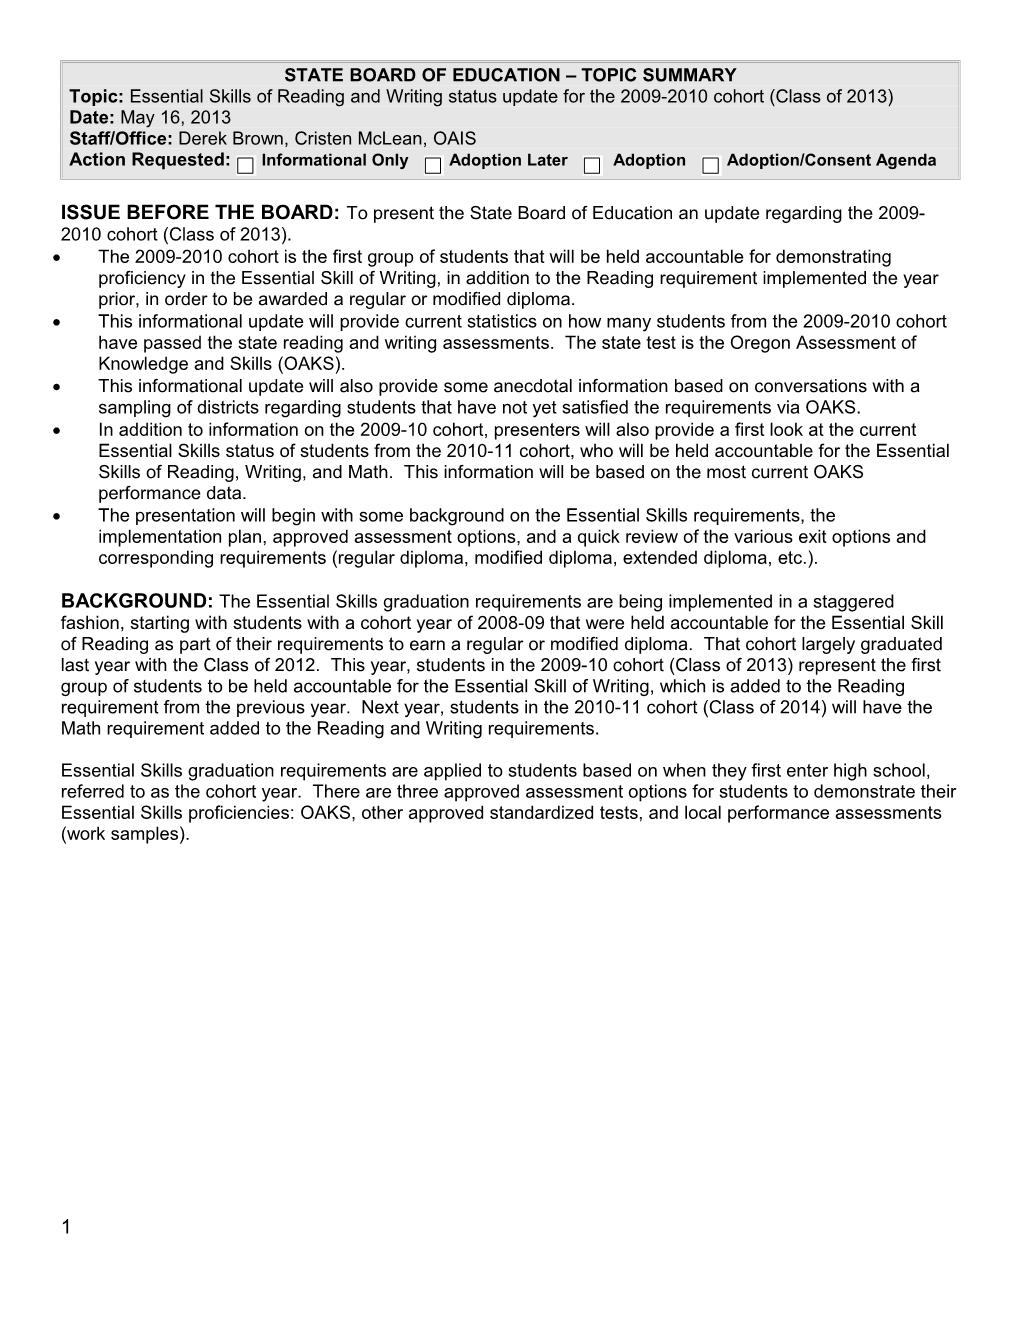 State Board of Education Topic Summary s19